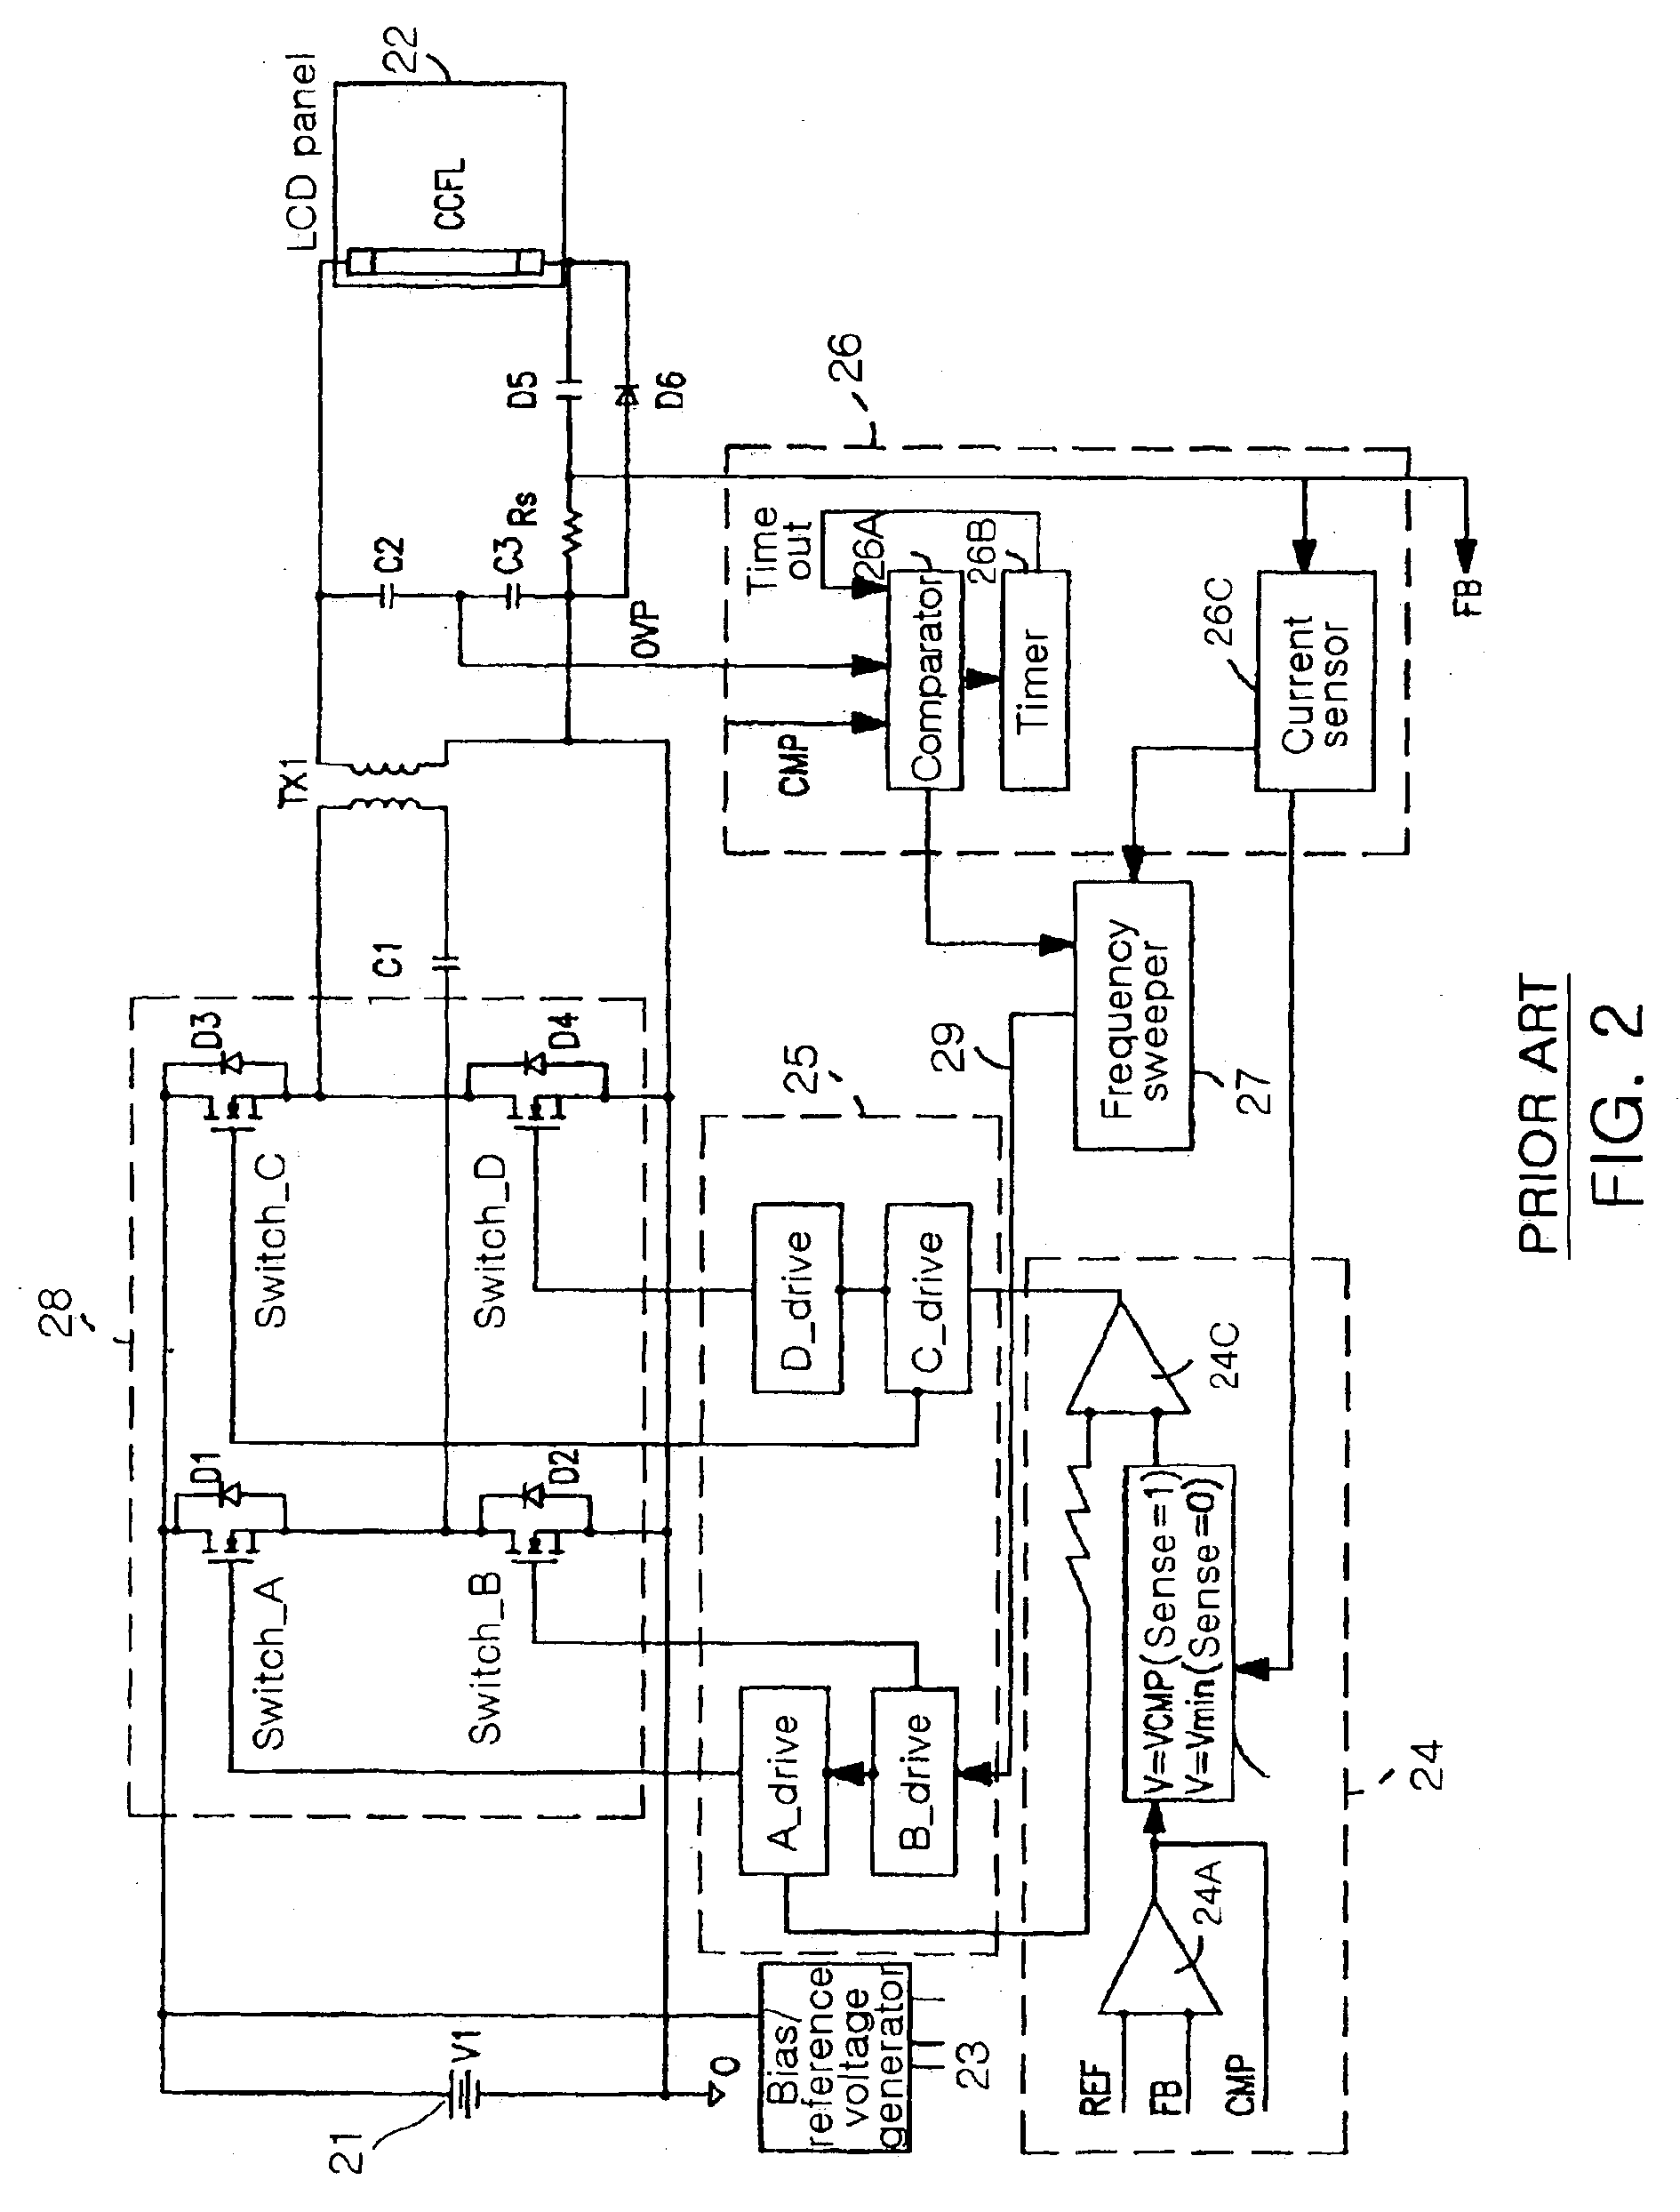 Backlight inverter for liquid crystal display panel with self-protection function